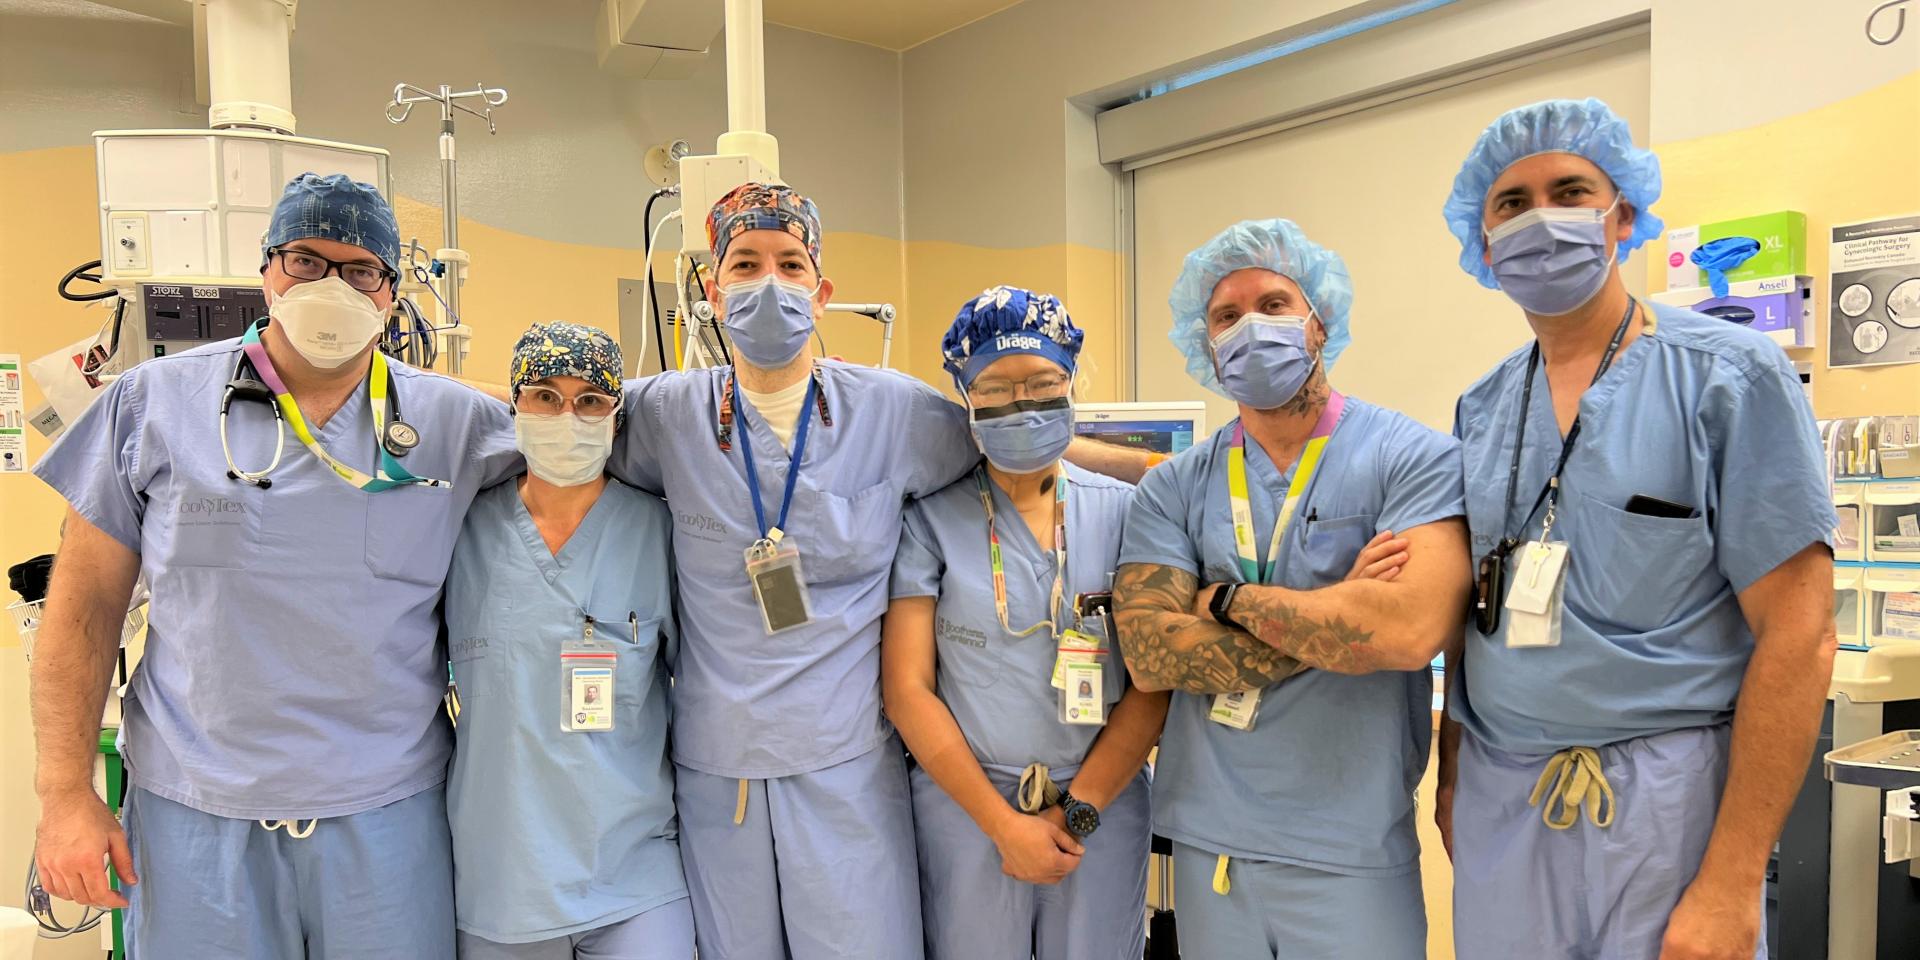 Anesthesiology team standing in scrubs.